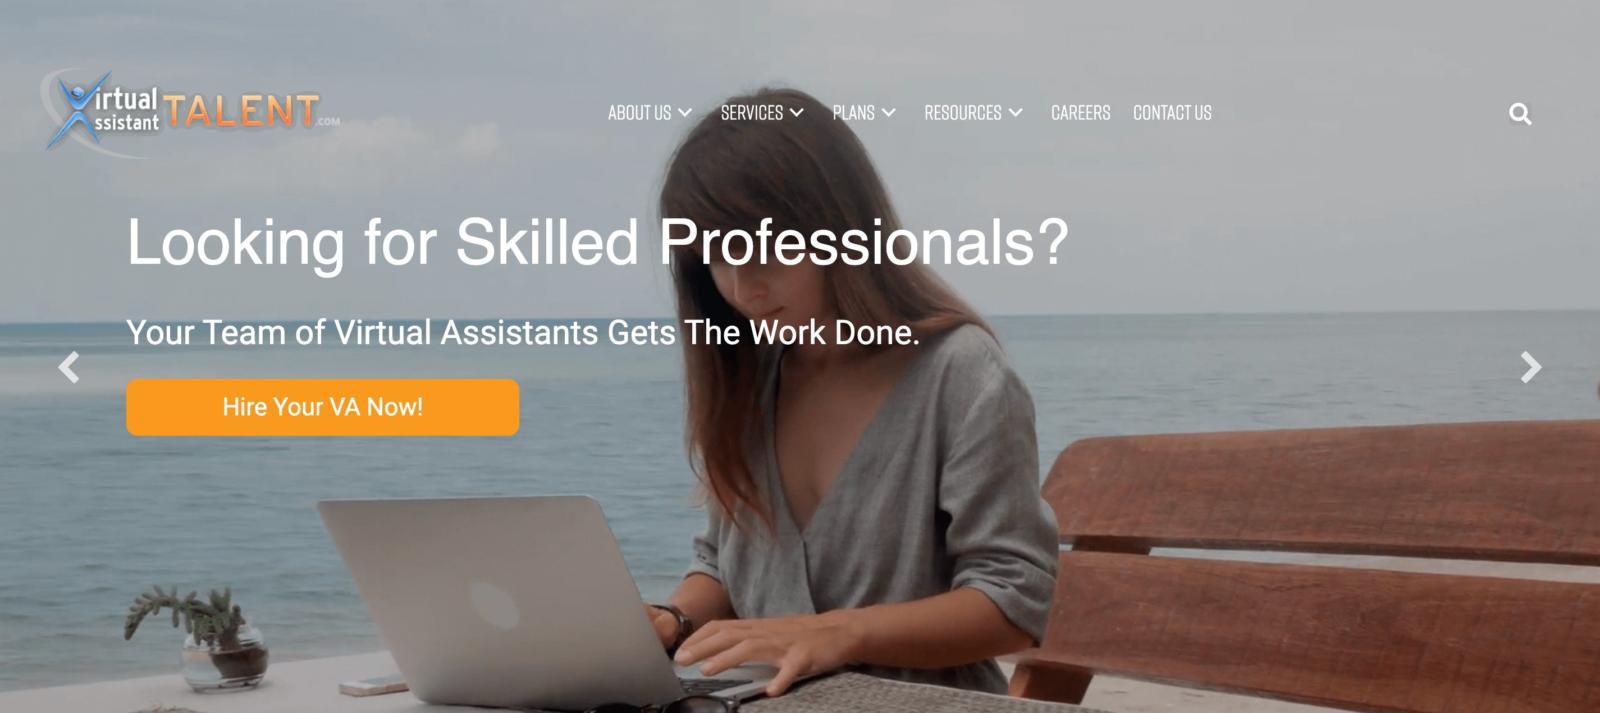 A screenshot of the Virtual Assistant Talent home page. 